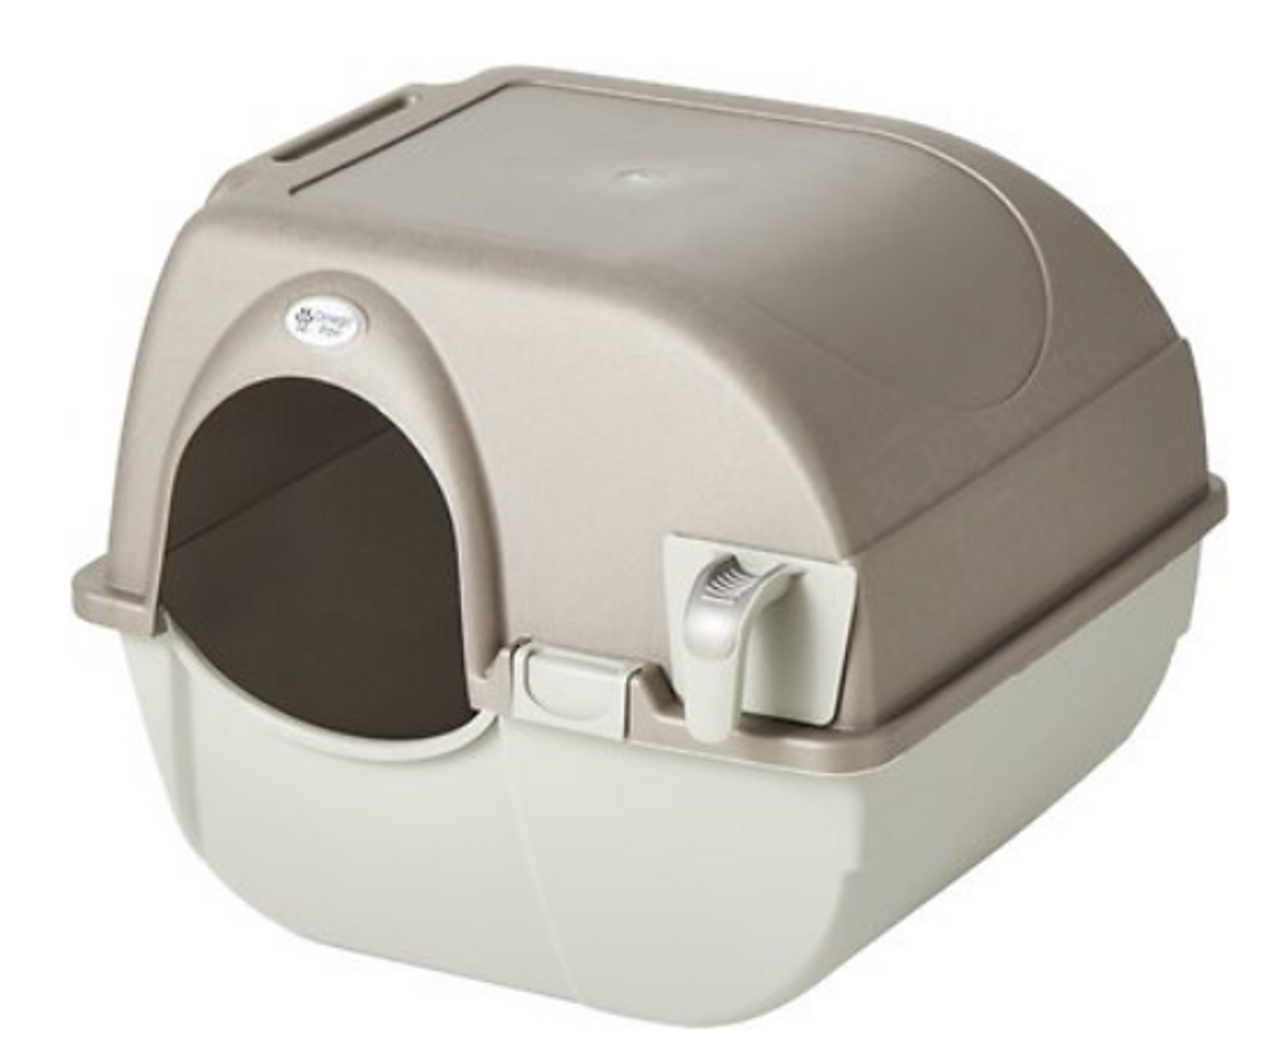 Omega Paw Roll 'n Clean Self Cleaning Cat And Kitten Litter Box